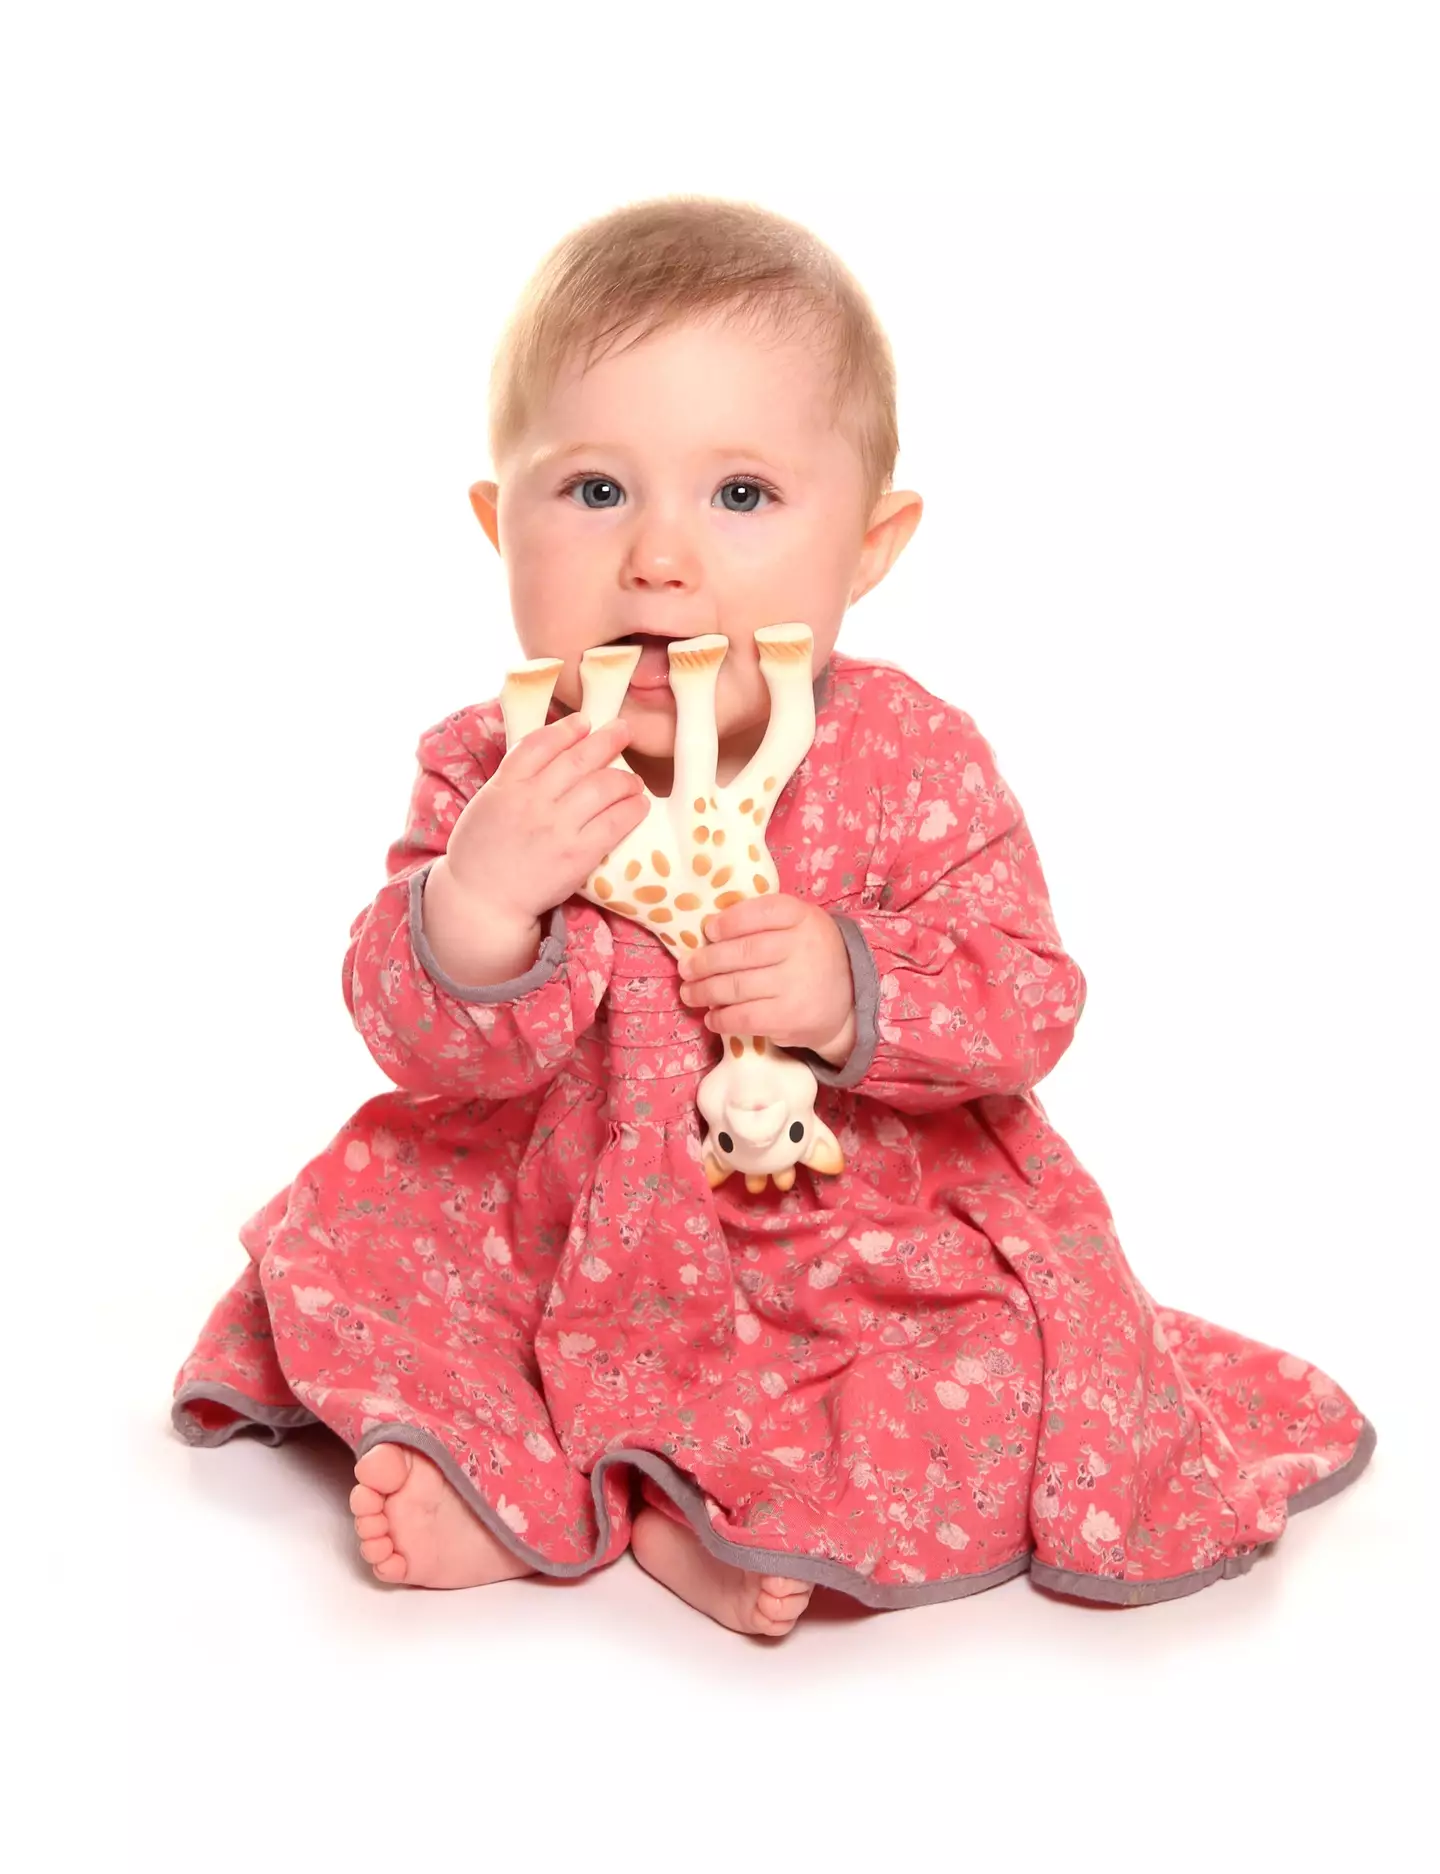 Sophie the Giraffe is a popular children's teething toy.